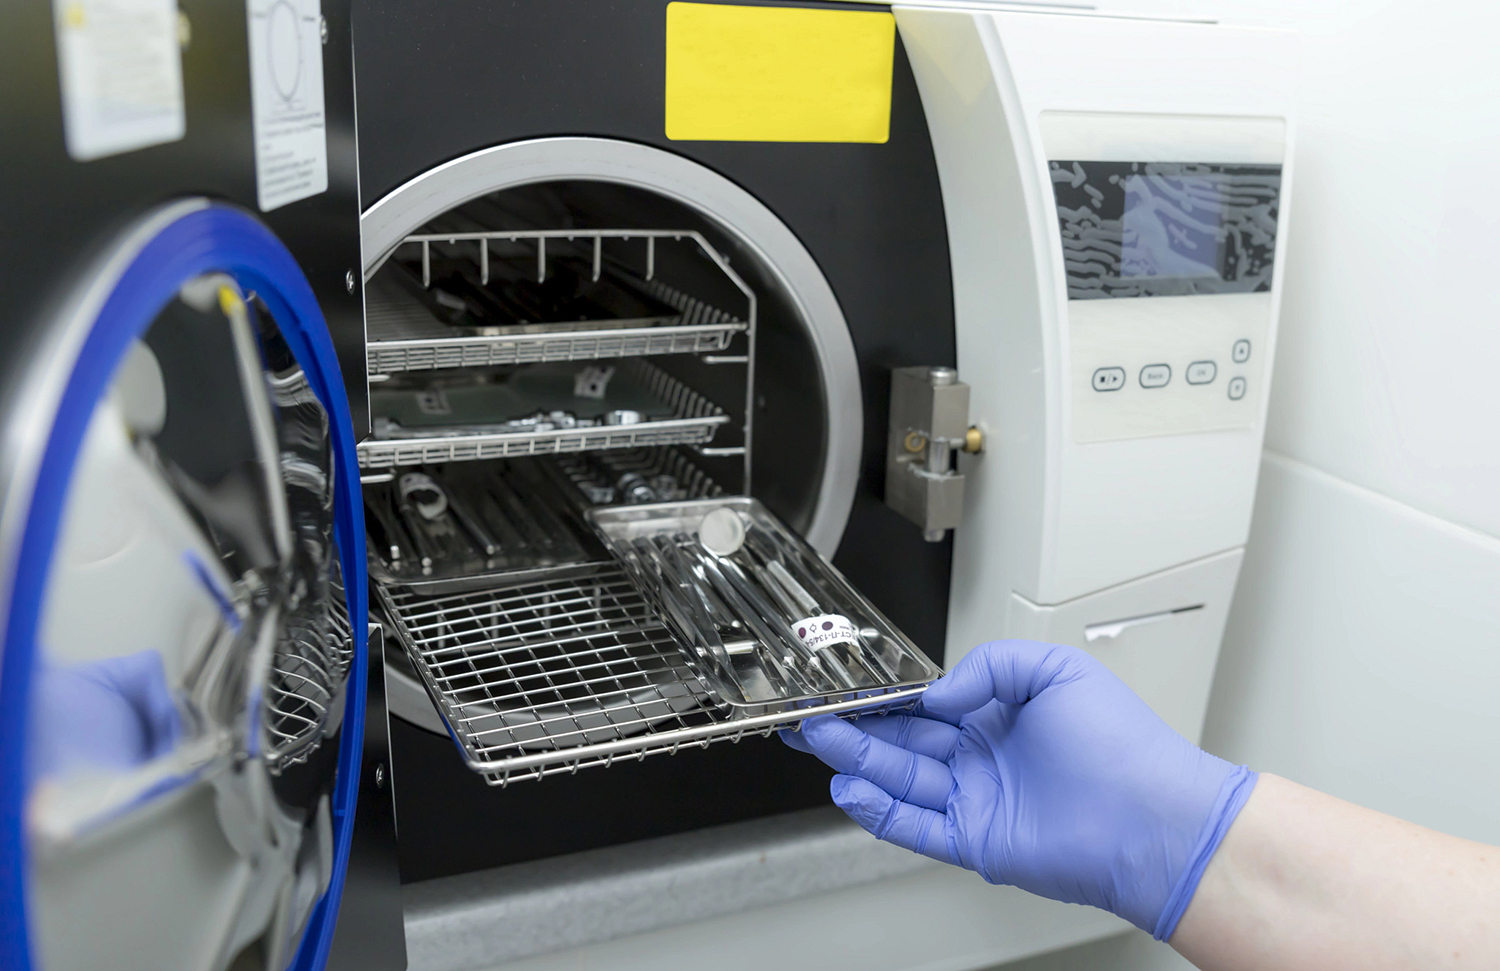 The most common sterilisation method used in hospitals is autoclaving, also called steam sterilisation.